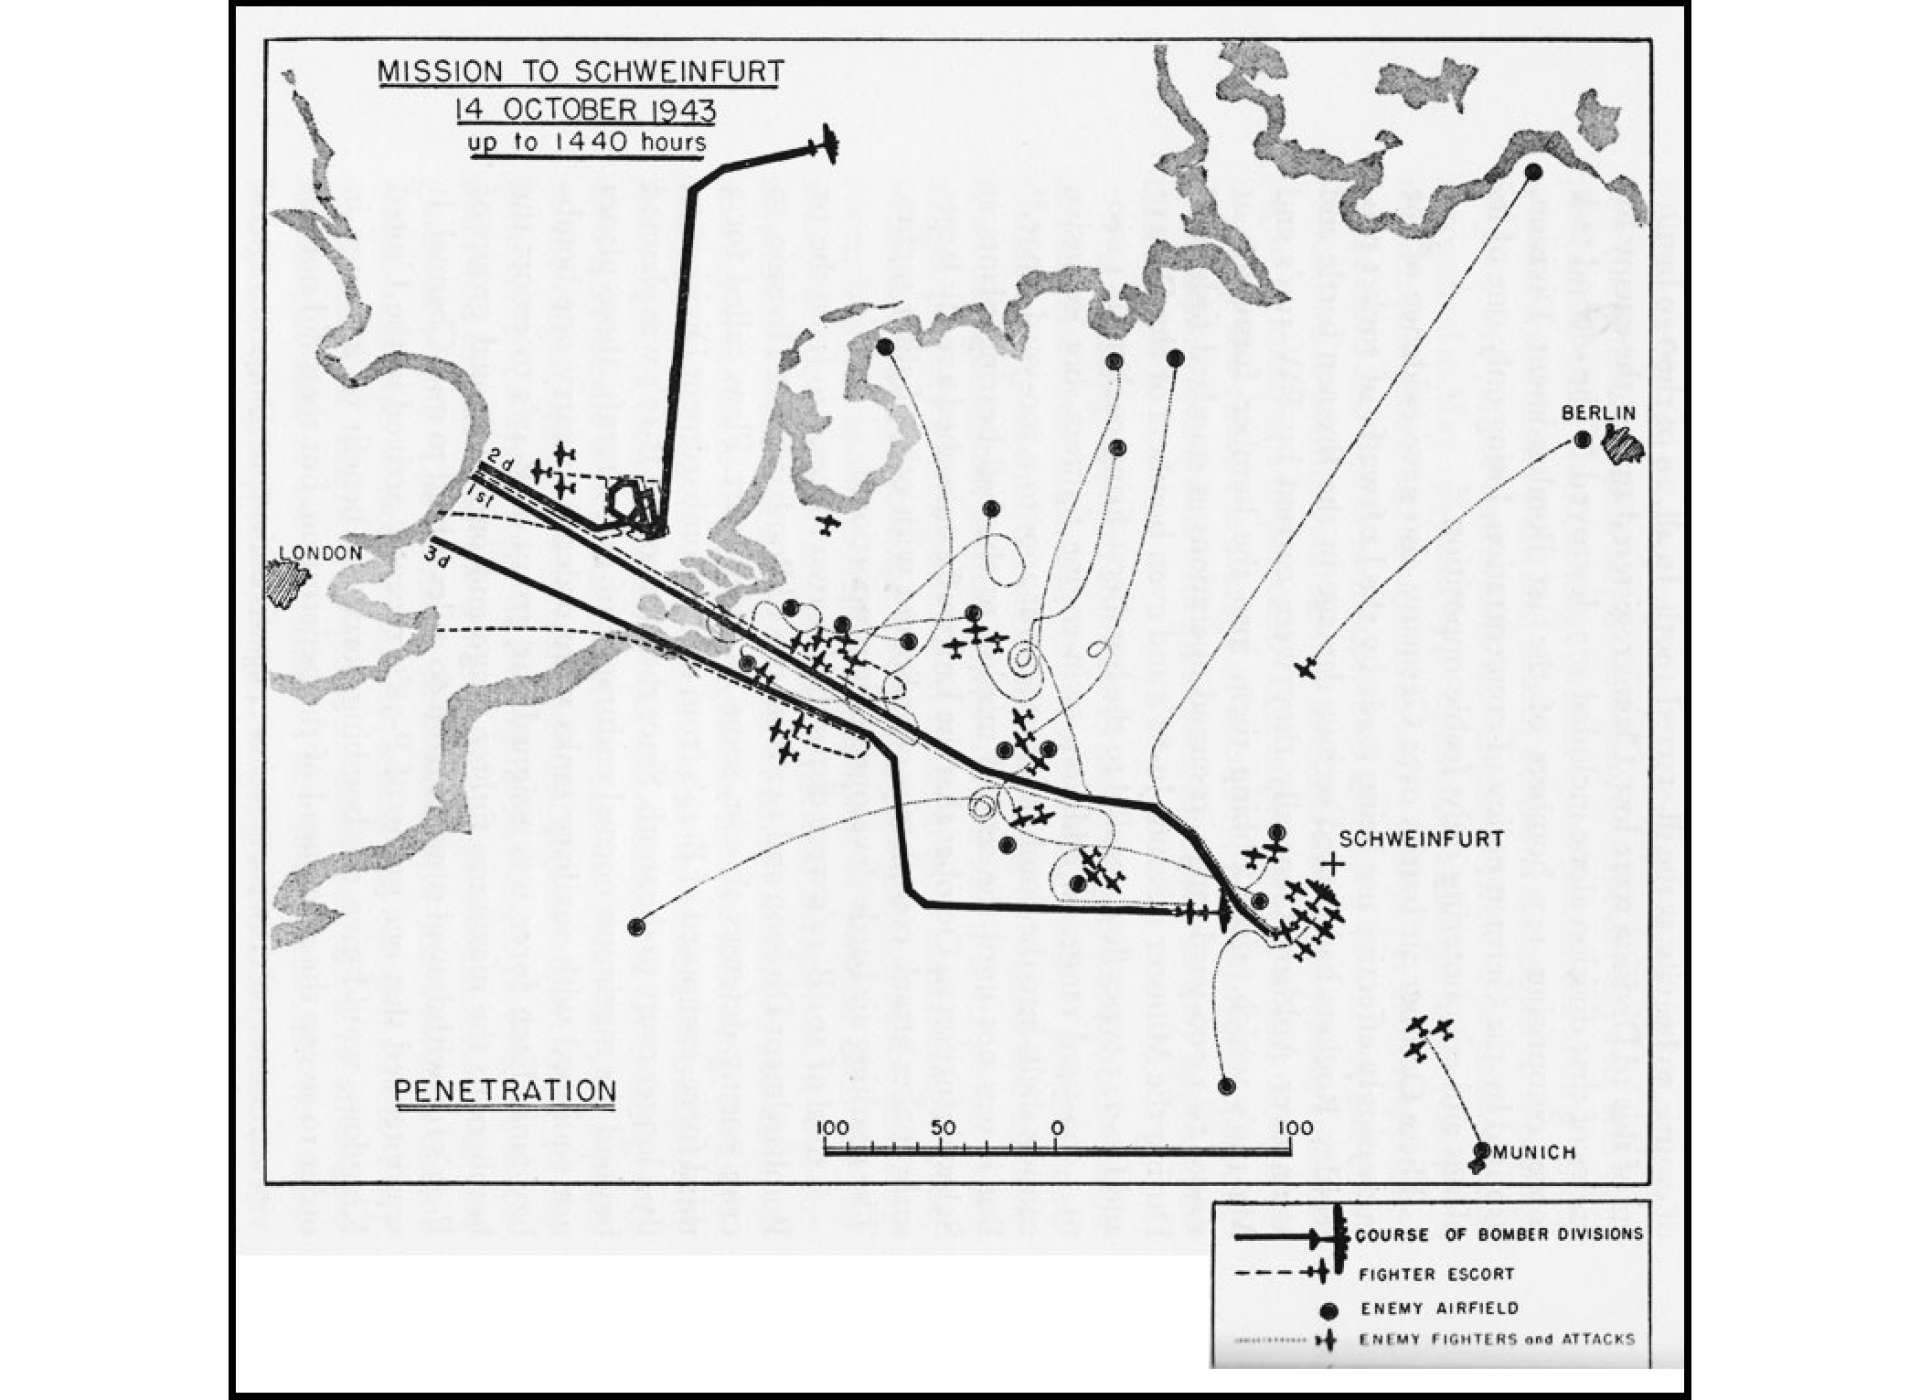 Inbound trek of the Second Schweinfurt Raid on August 14, 1943. German fighters attacked the American formations once the American fighters reached their operational range. (US Air Force)